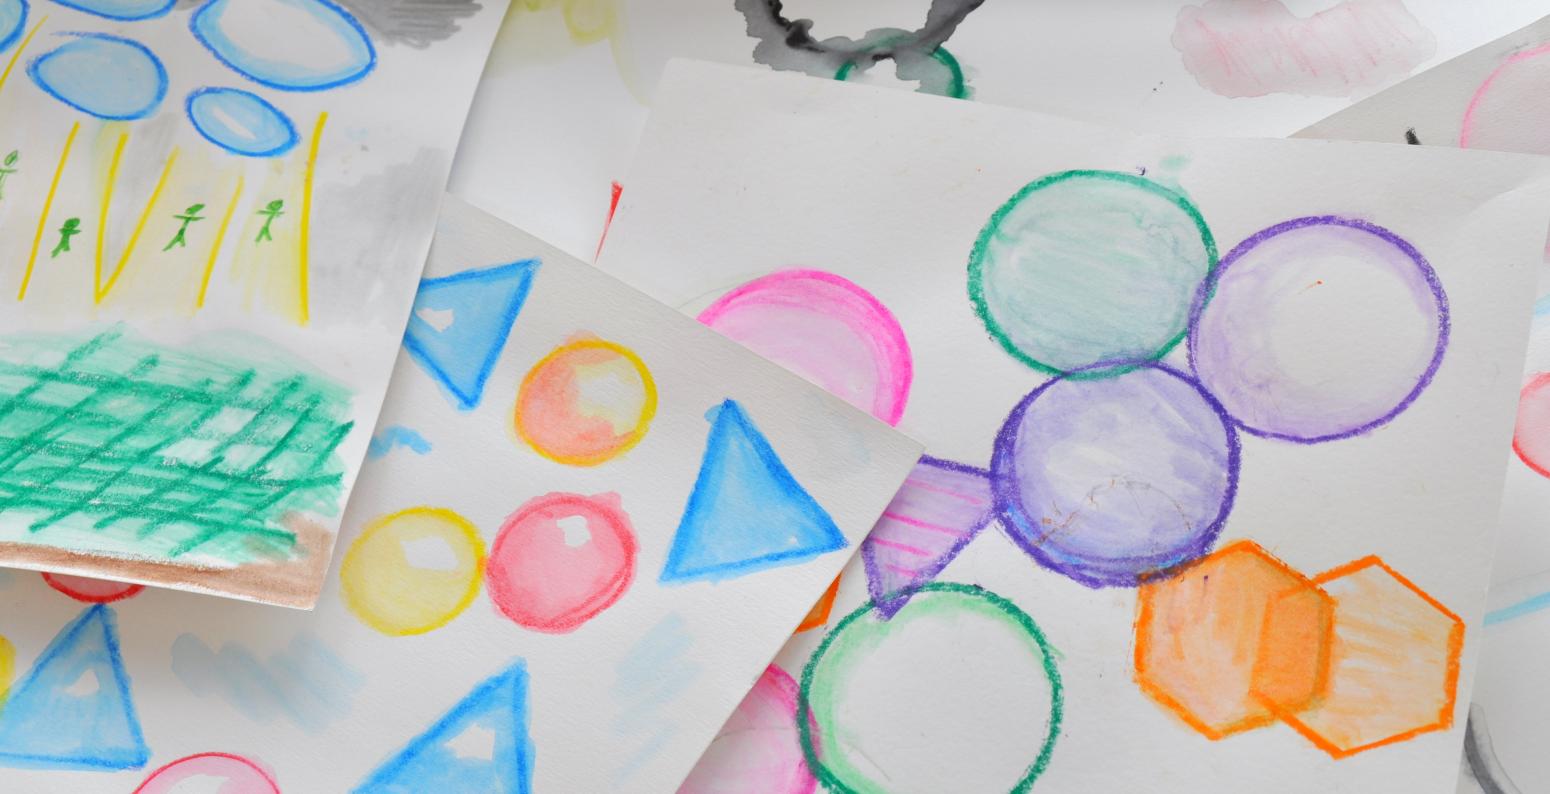 Colorful painted shapes made using watercolor pencils.